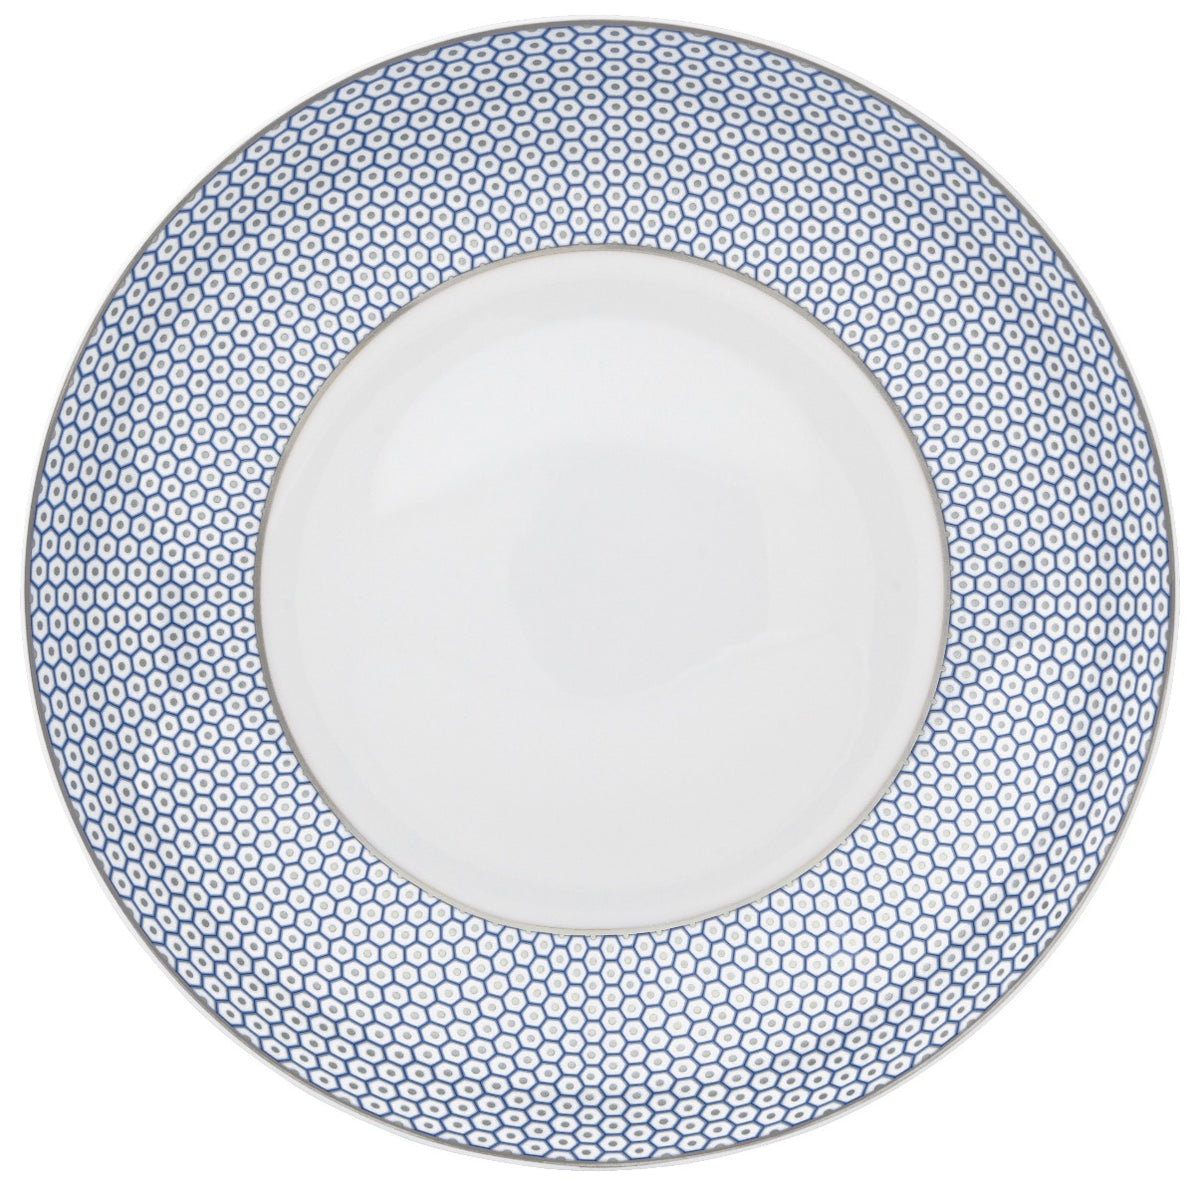 French Rim Soup Plate